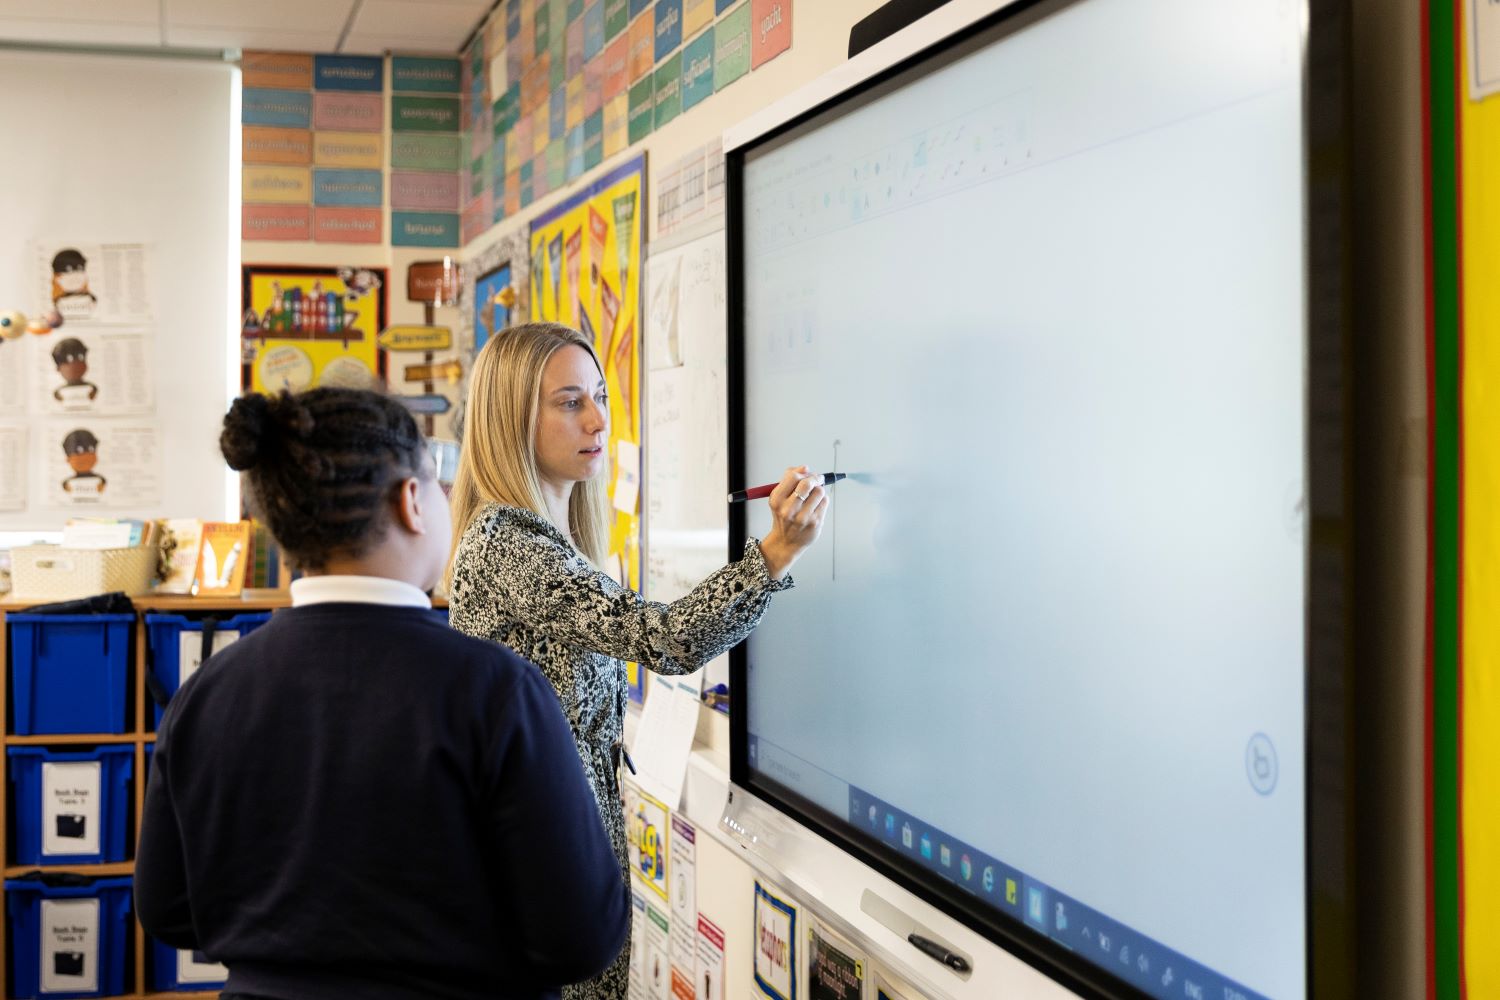 A teacher shows a student how to use an interactive board